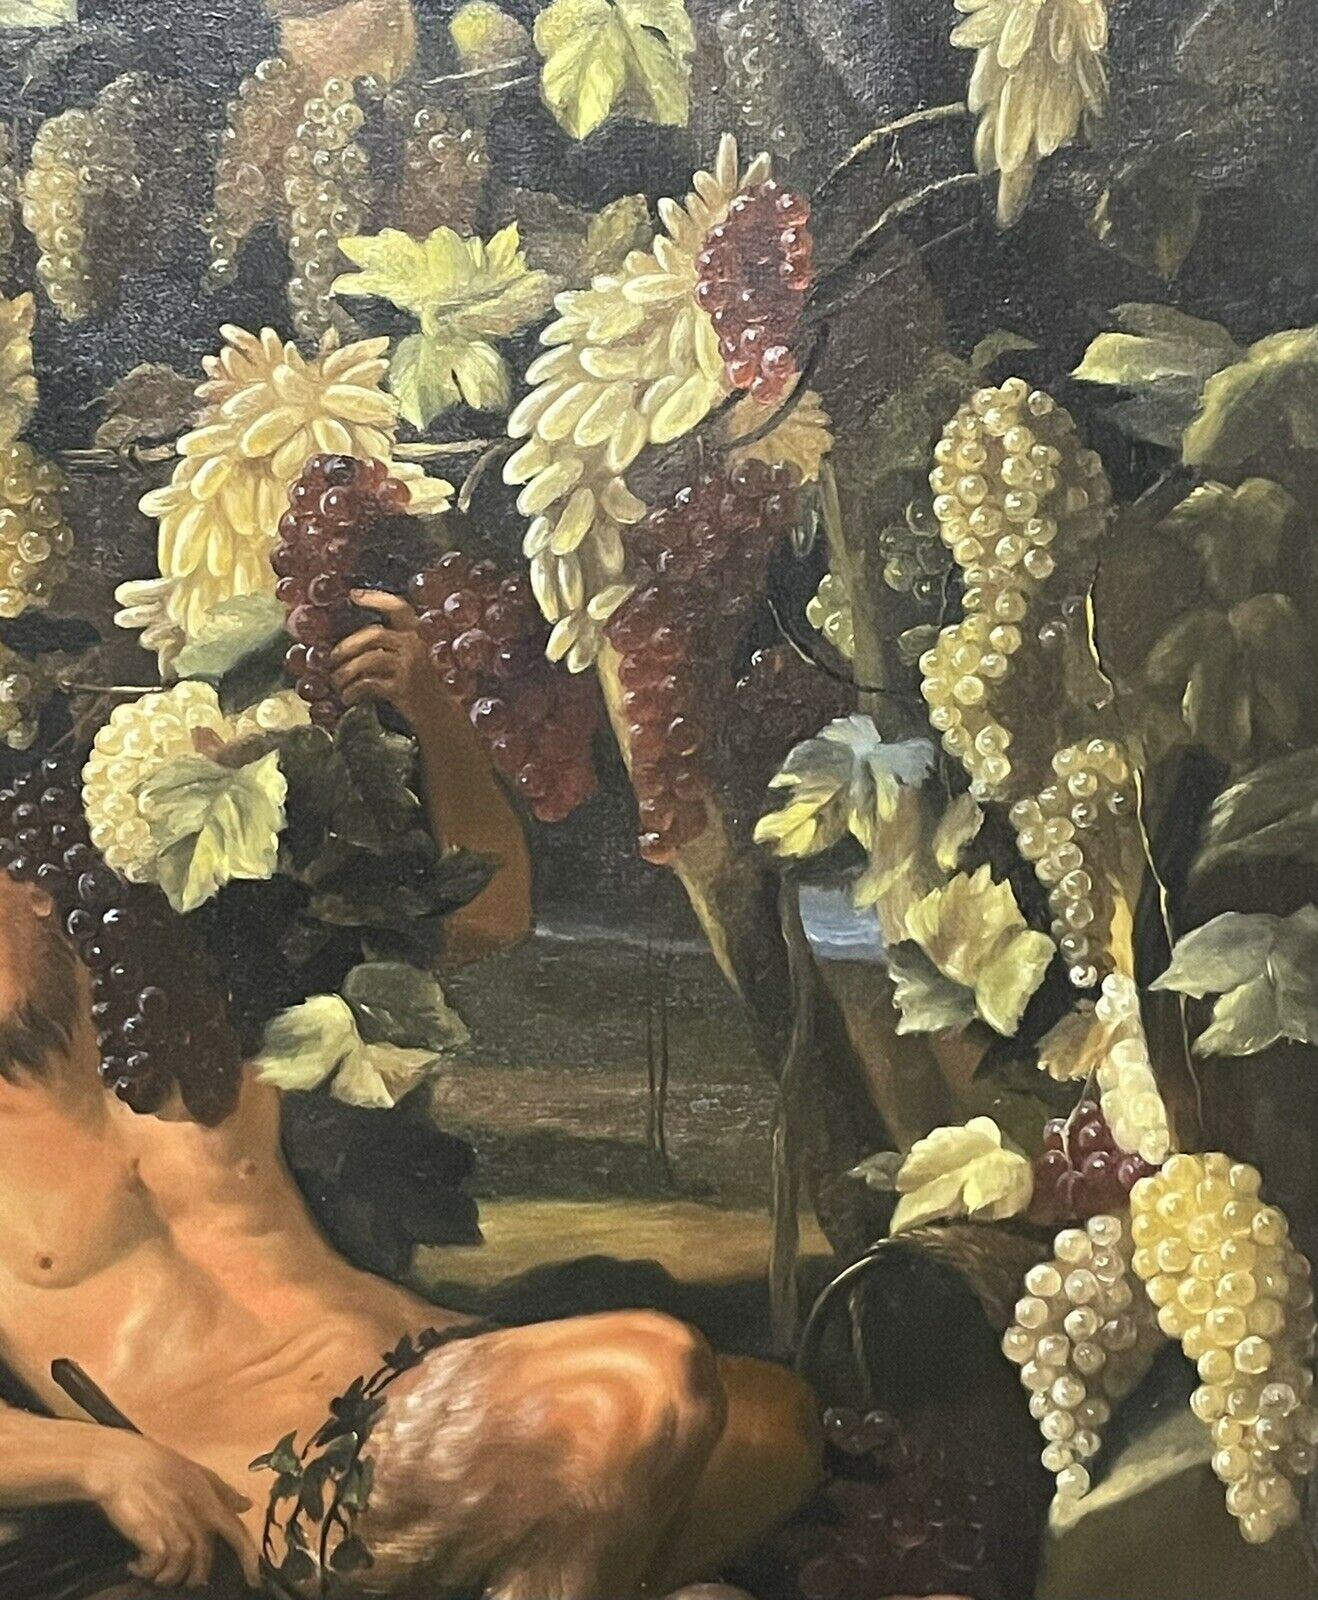 HUGE CLASSICAL OIL PAINTING - BACCHUS FESTIVAL GRAPE HARVEST - MYTHOLOGICAL - Gray Figurative Painting by Unknown